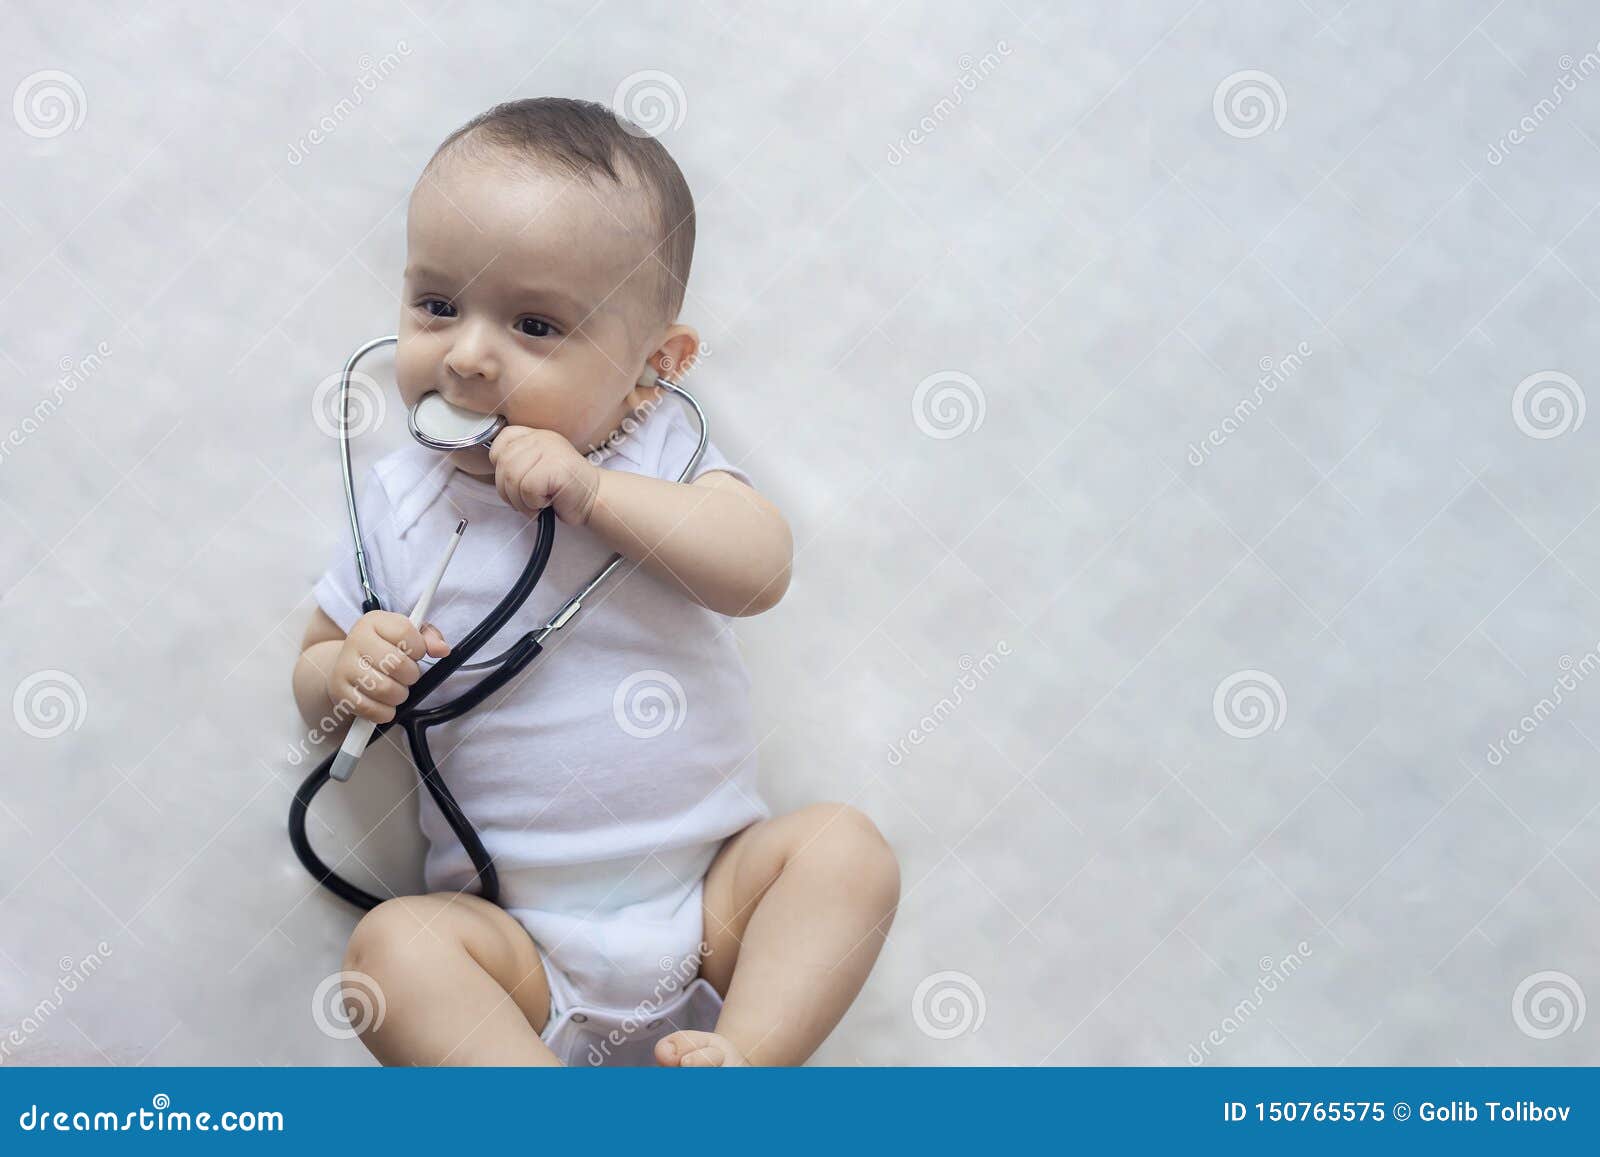 Little Cute Baby Doctor. 6-month Old Baby Boy Playing with ...